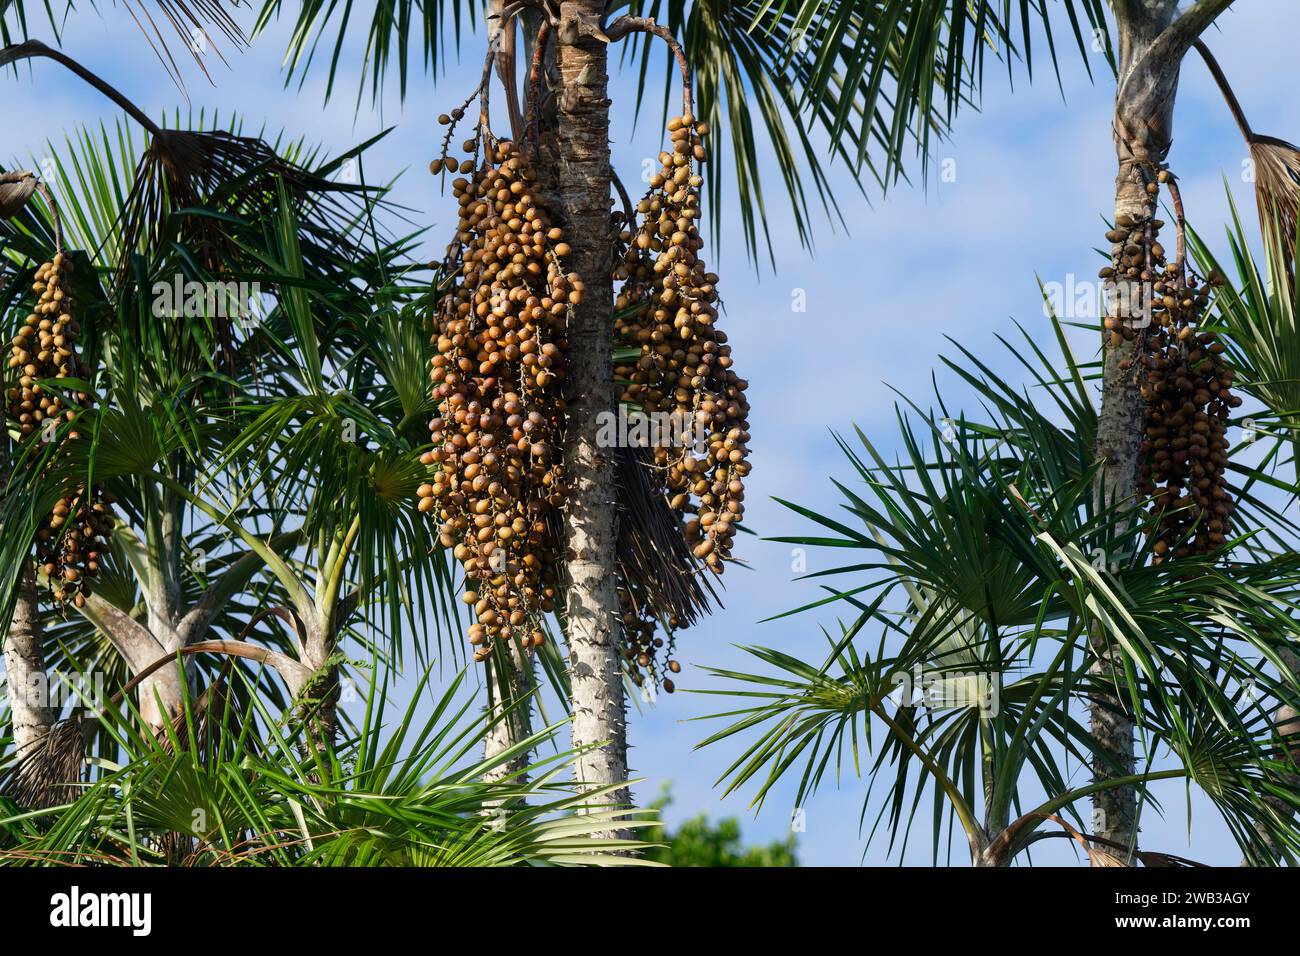 Fruits of the Mauritia flexuosa palm tree known as the moriche palm, Para state, Brazil Stock Photo